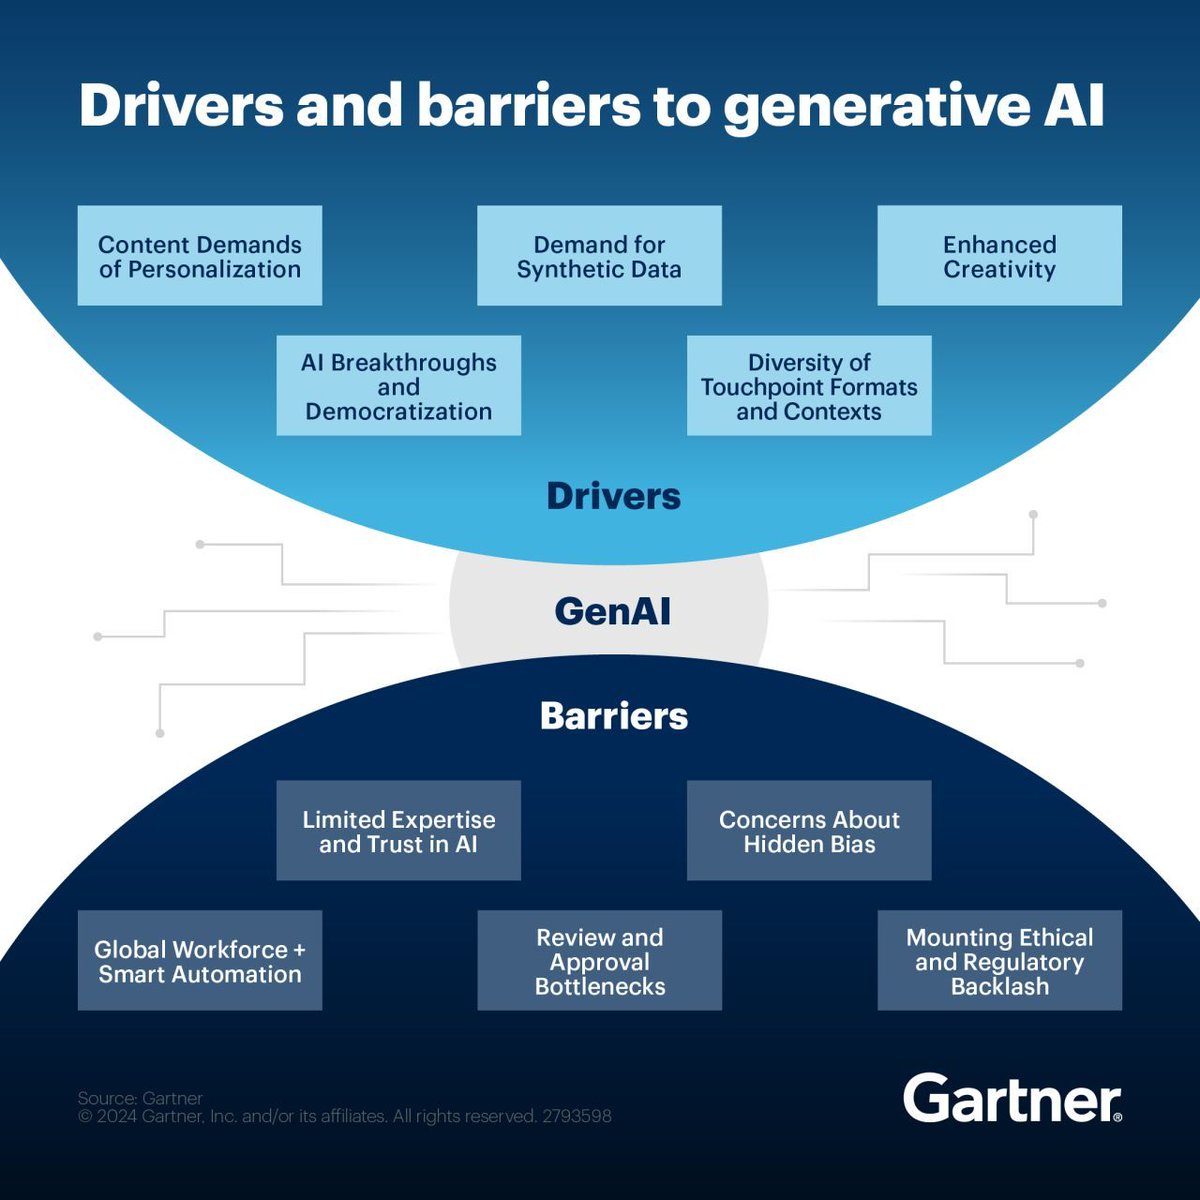 As with any innovation, executive leaders must understand the drivers and barriers that come with using GenAI.
  
Explore the proven applications of GenAI to enhance your content experience: gtnr.it/3w4Q9lG

#GartnerIT #GenAI #AI #GenerativeAI